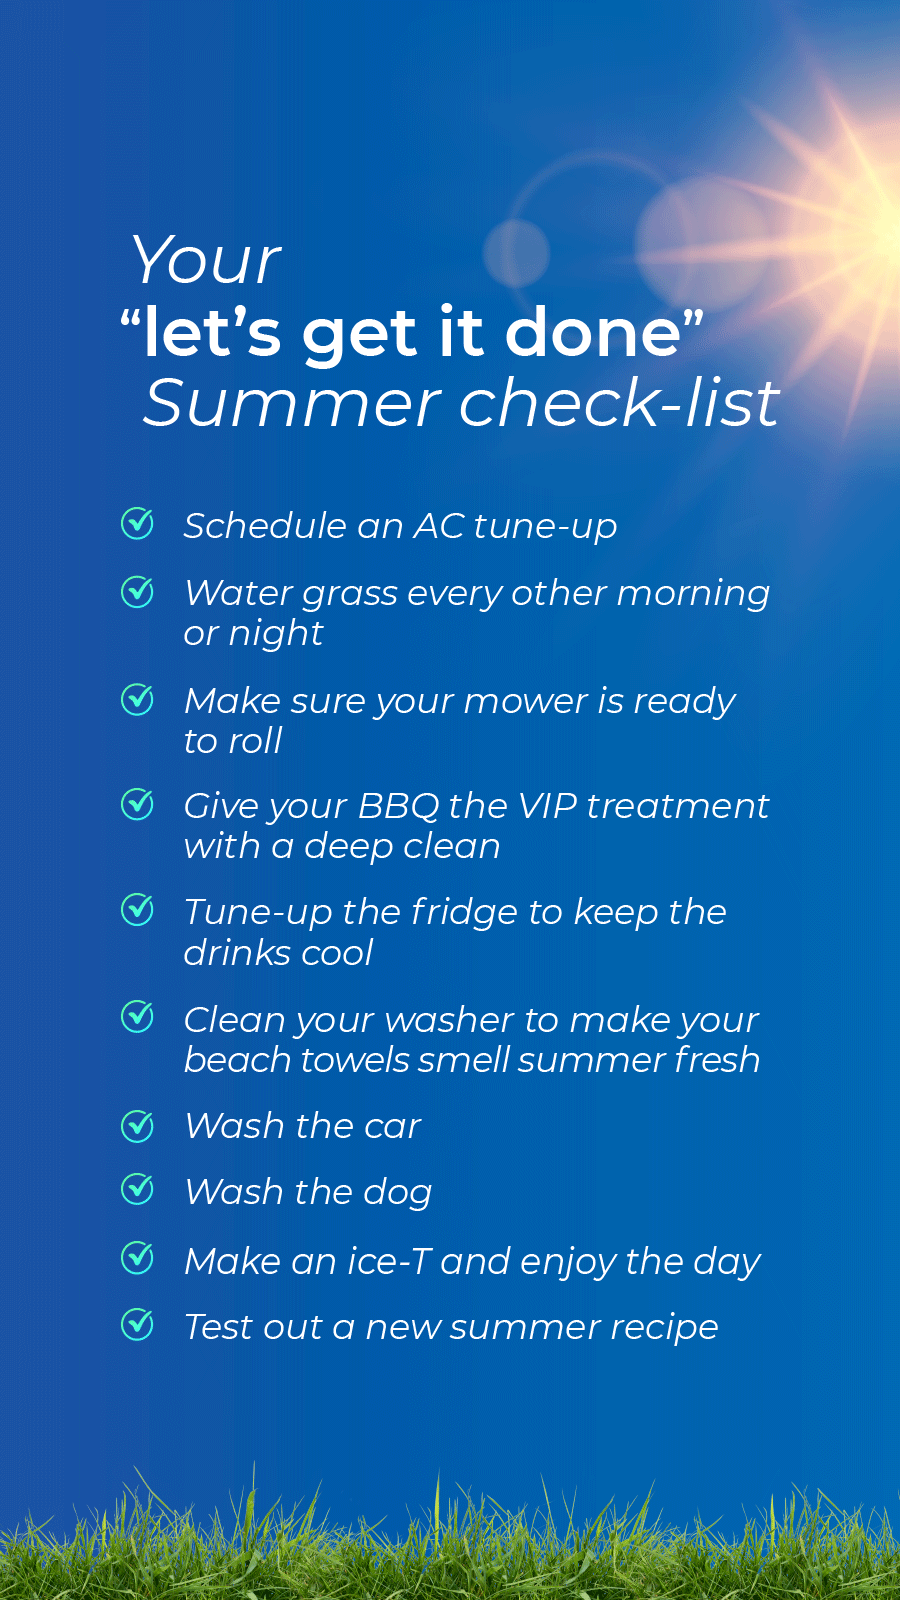 Your 'let's get it done' summer checklist